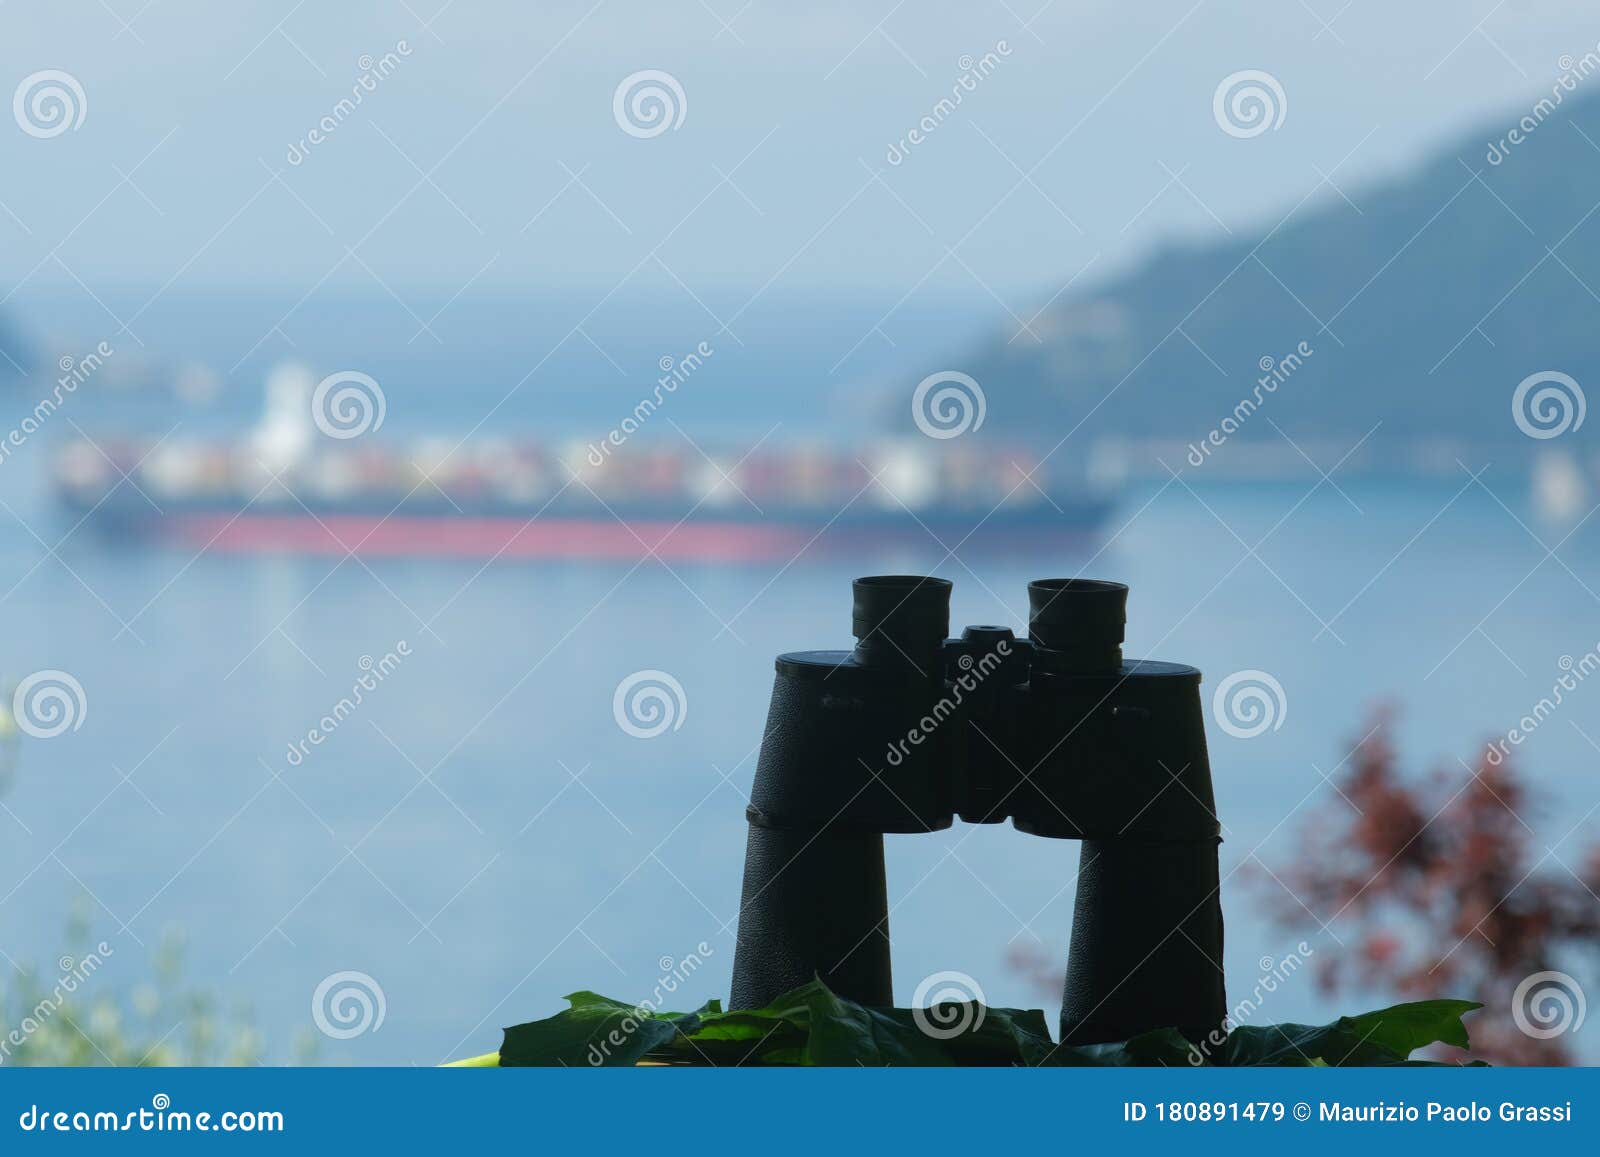 binoculars resting on a table. container ship cargo ship on the background. ligurian mediterranean sea in the gulf of la spezia